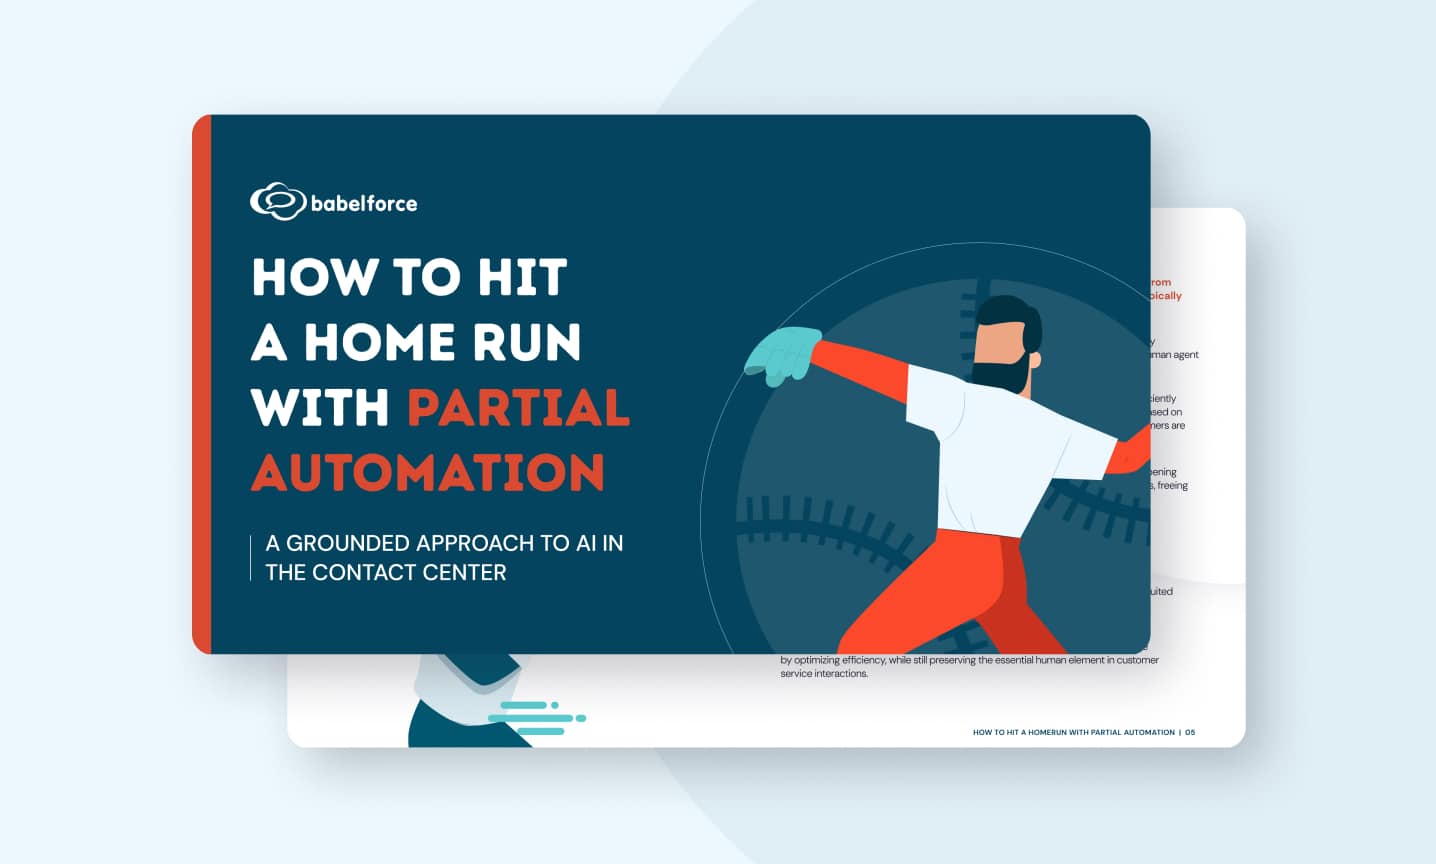 An illustration of a baseball player next to the title 'How to hit a home run with partial automation'